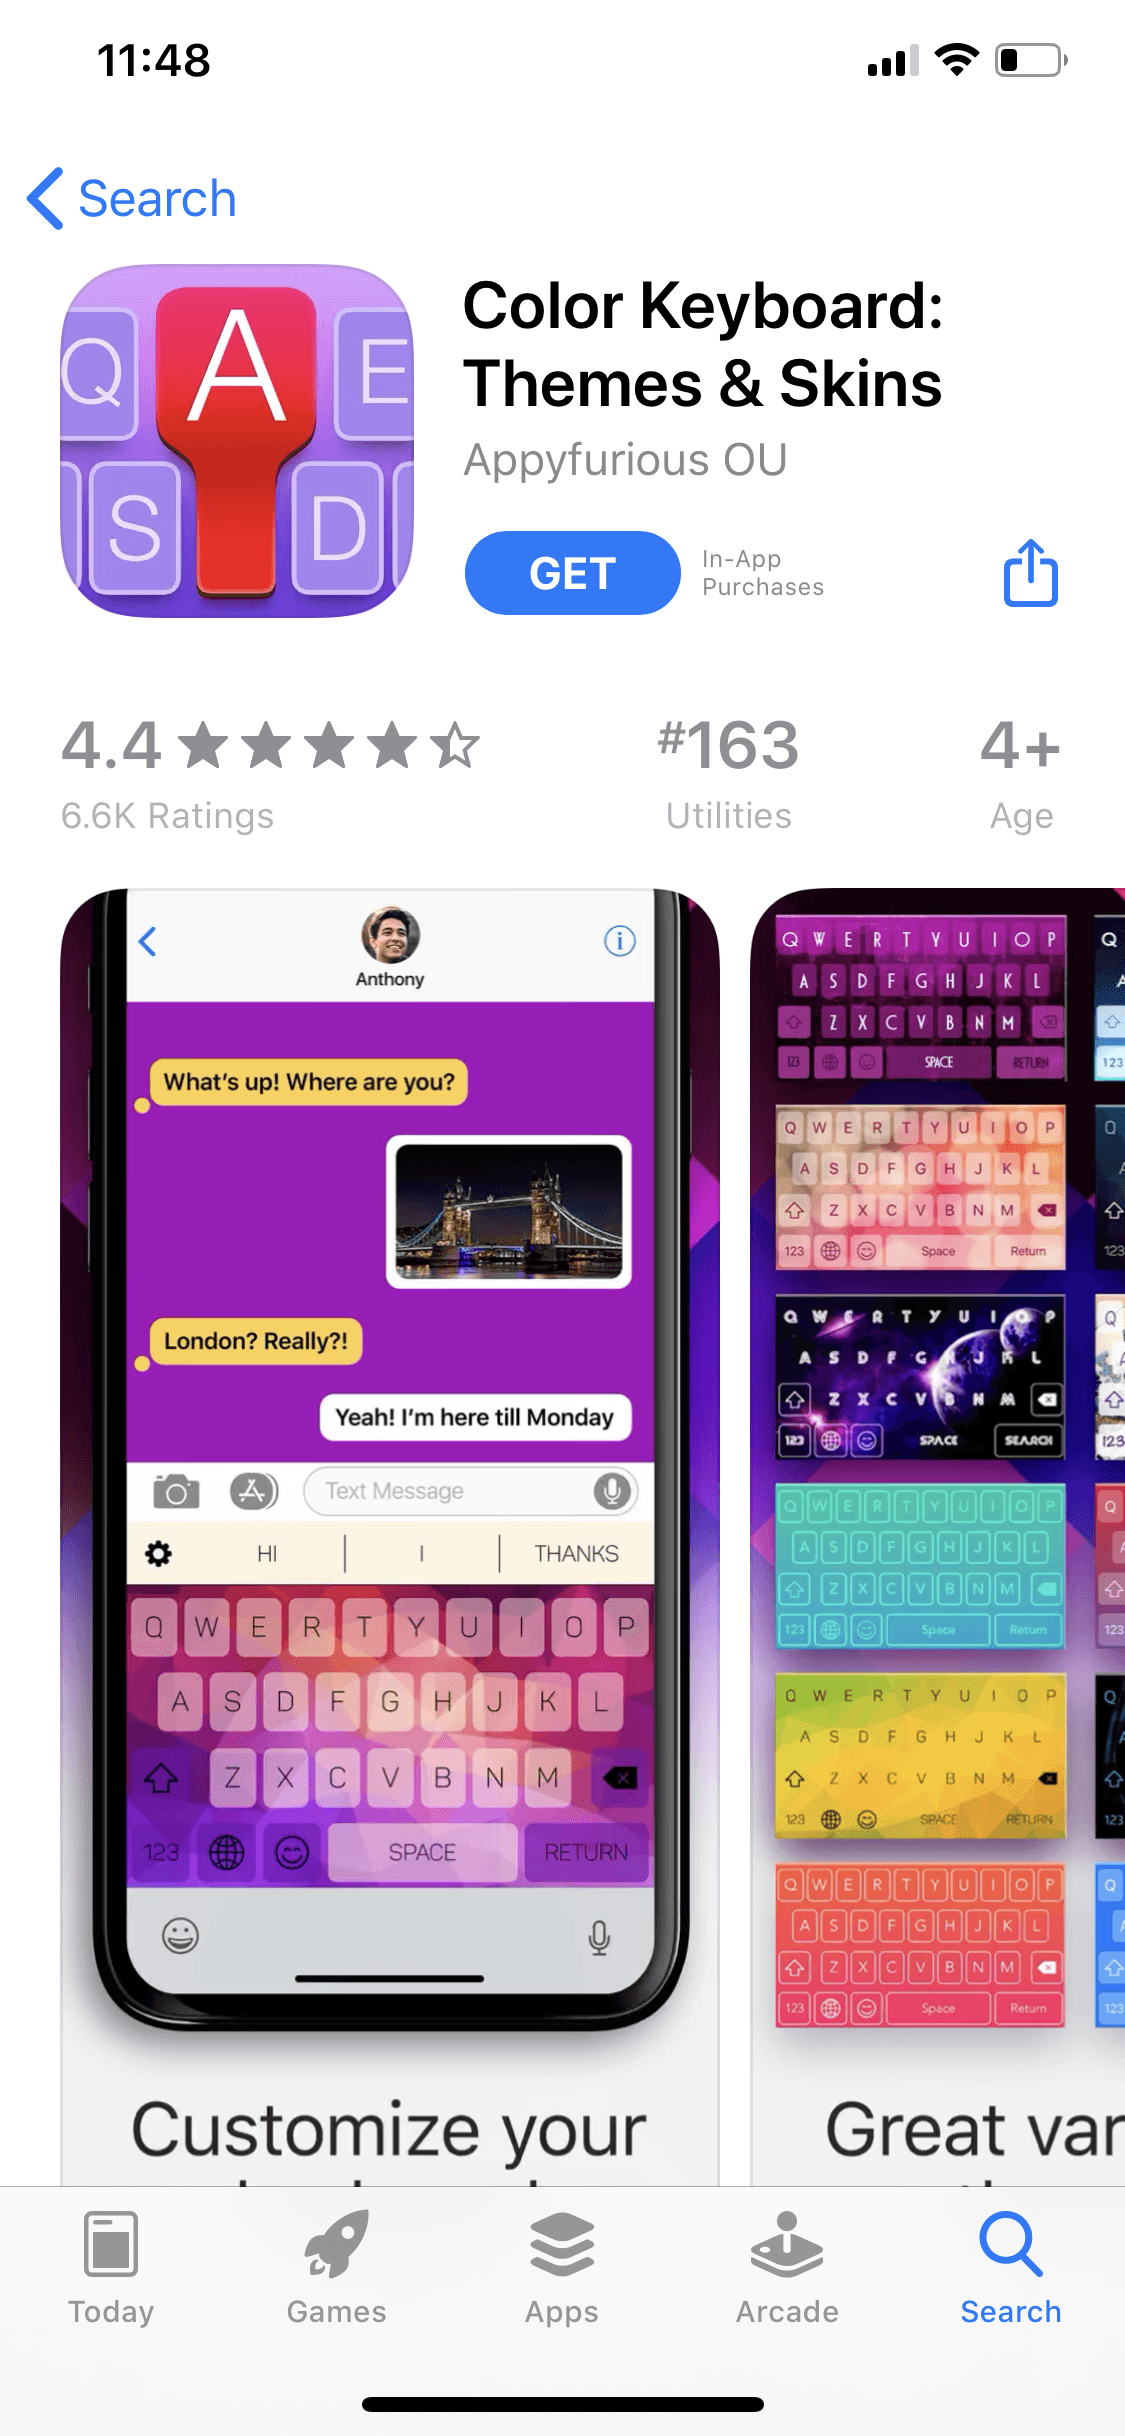 Color keyboard themes and themes